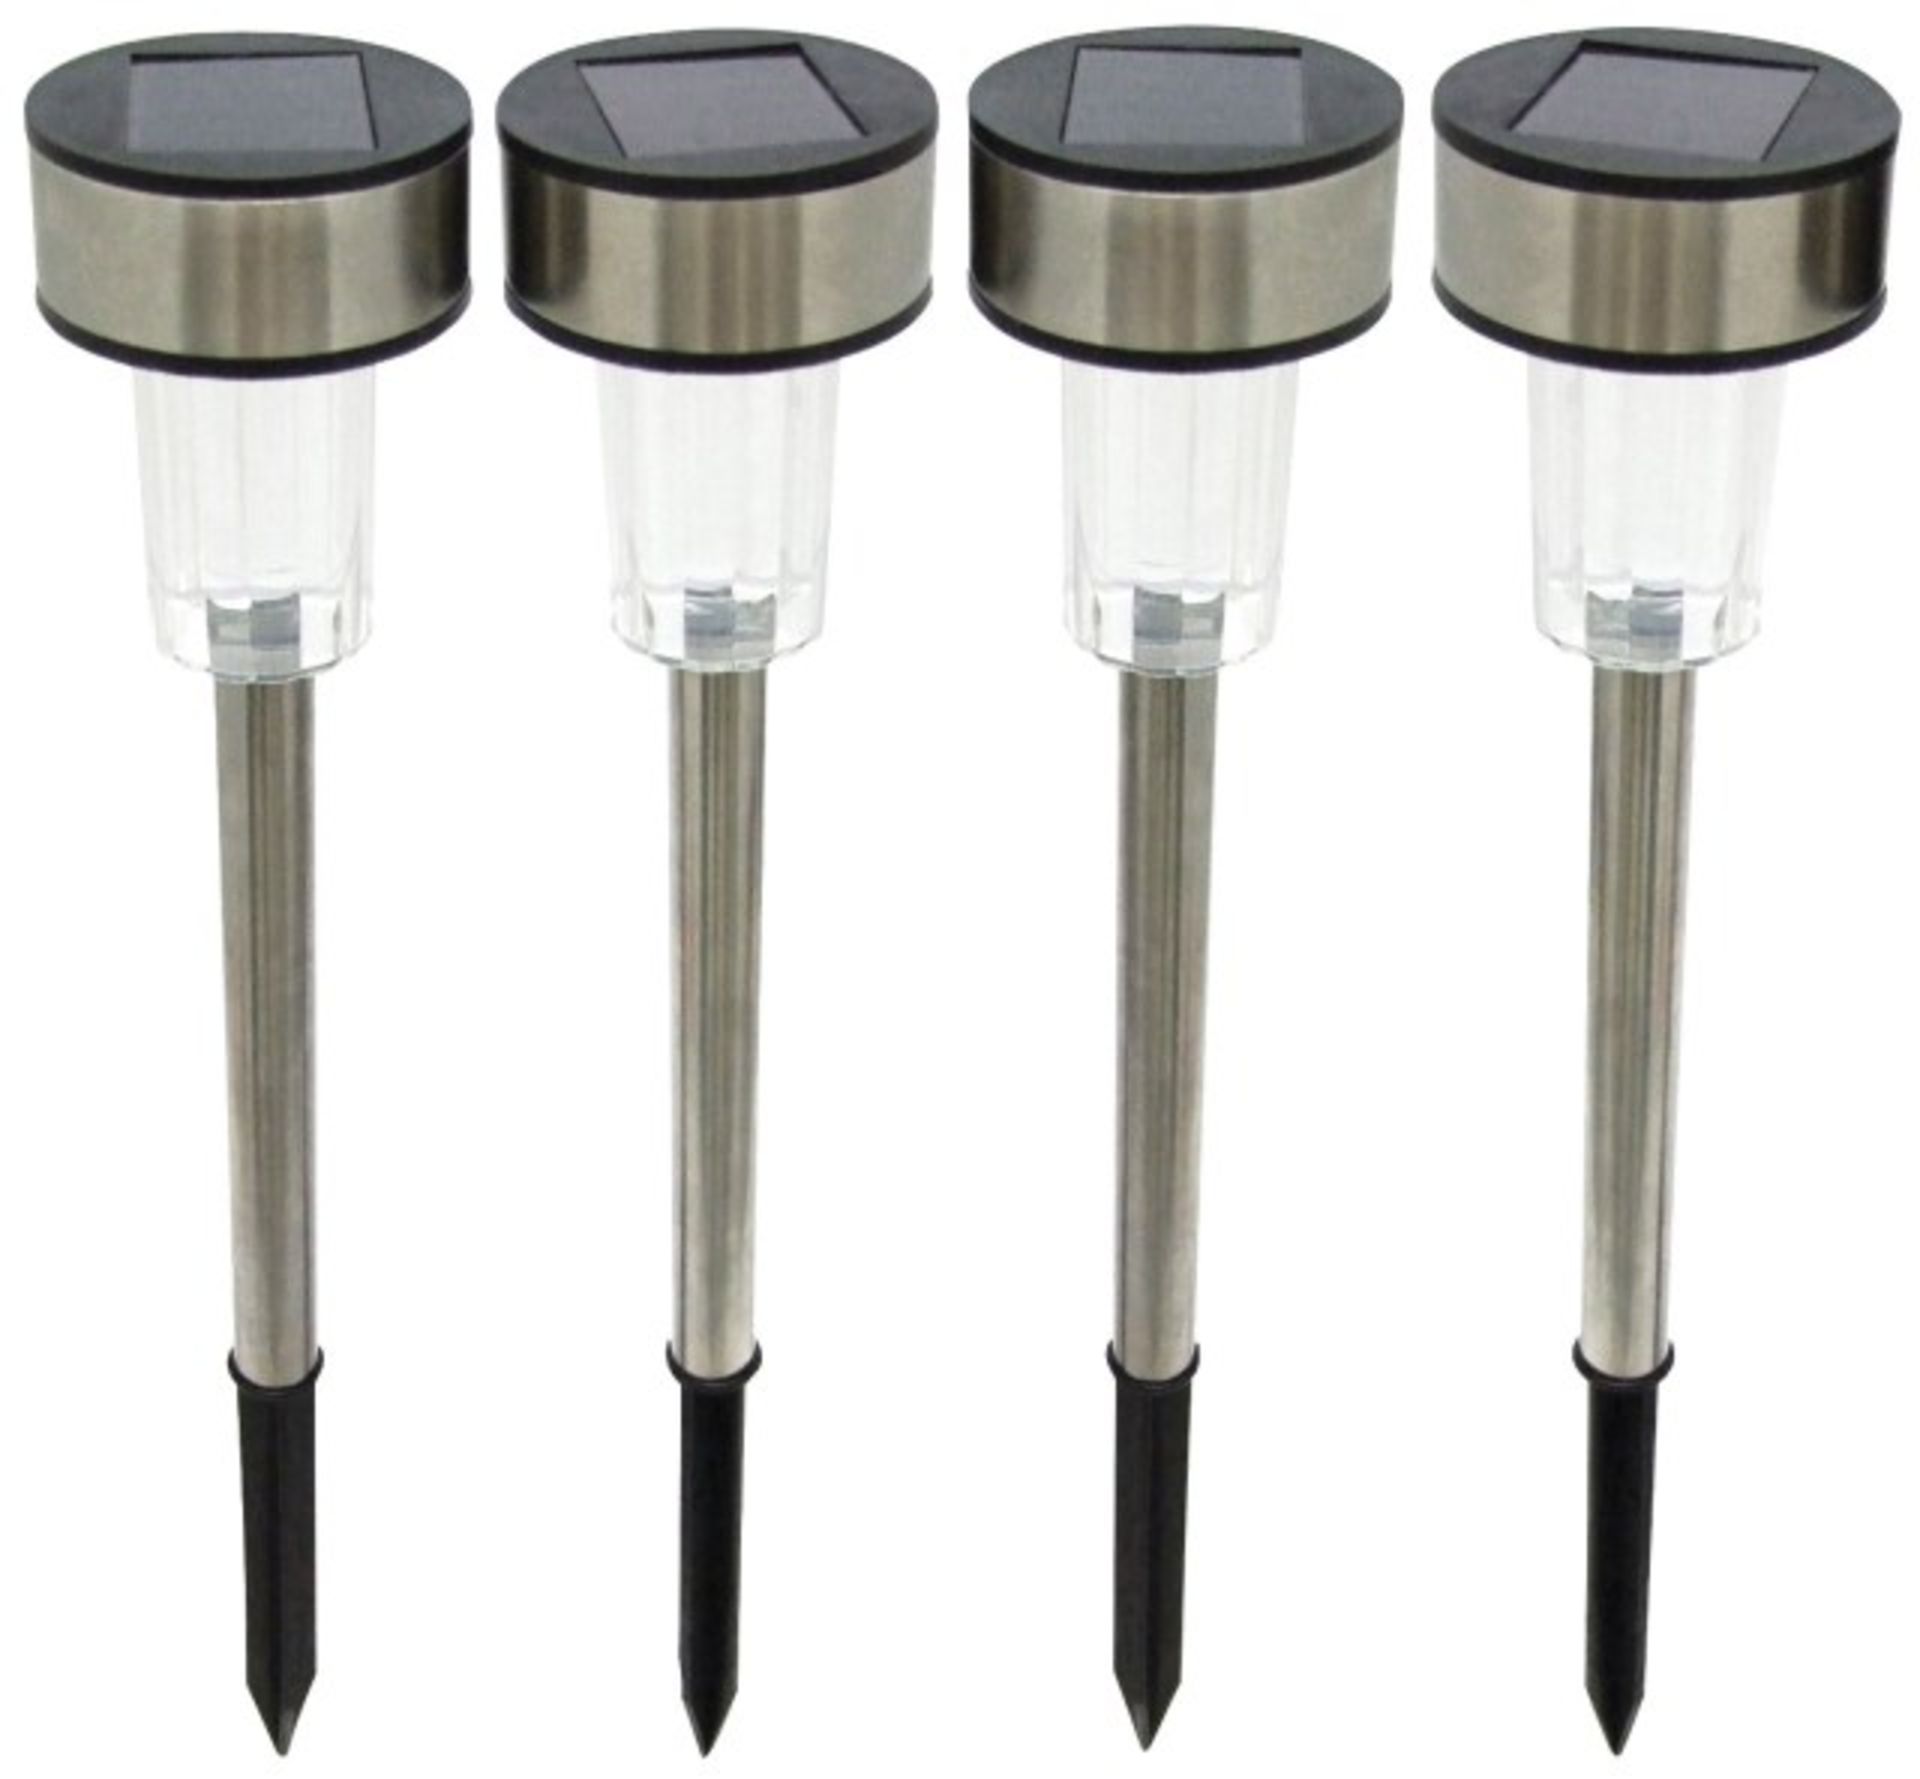 V *TRADE QTY* Brand New Set Of 4 Kempton Stainless Steel Solar Lights X 4 YOUR BID PRICE TO BE